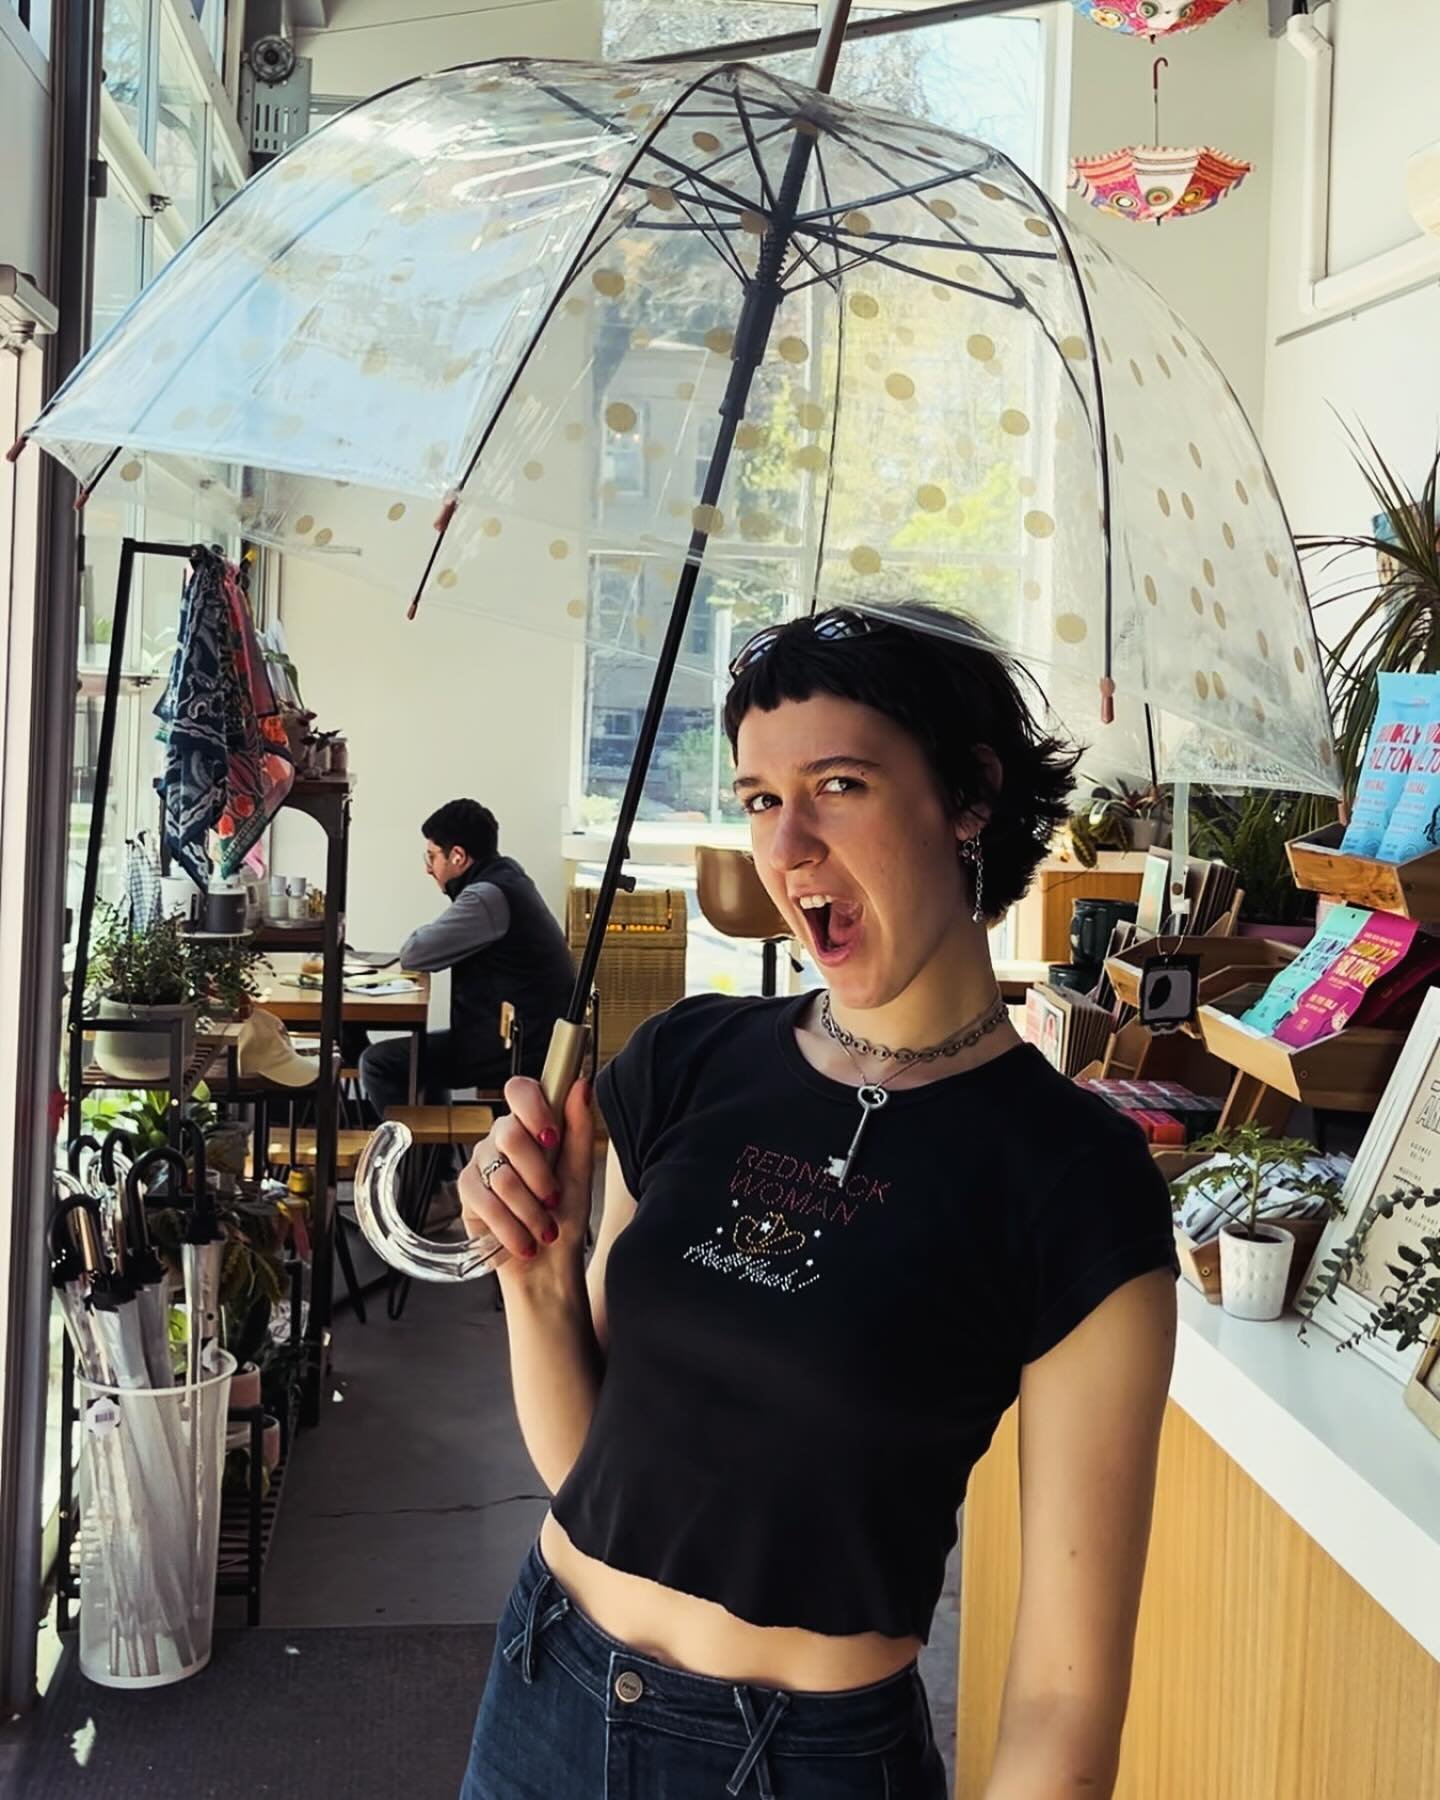 What&rsquo;s one more open indoor umbrella under a sea of open indoor umbrellas?! Just another Friday pushing our luck at Press Cafe 😋☂️

New Umbrellas from France - Ooh La La!! $18